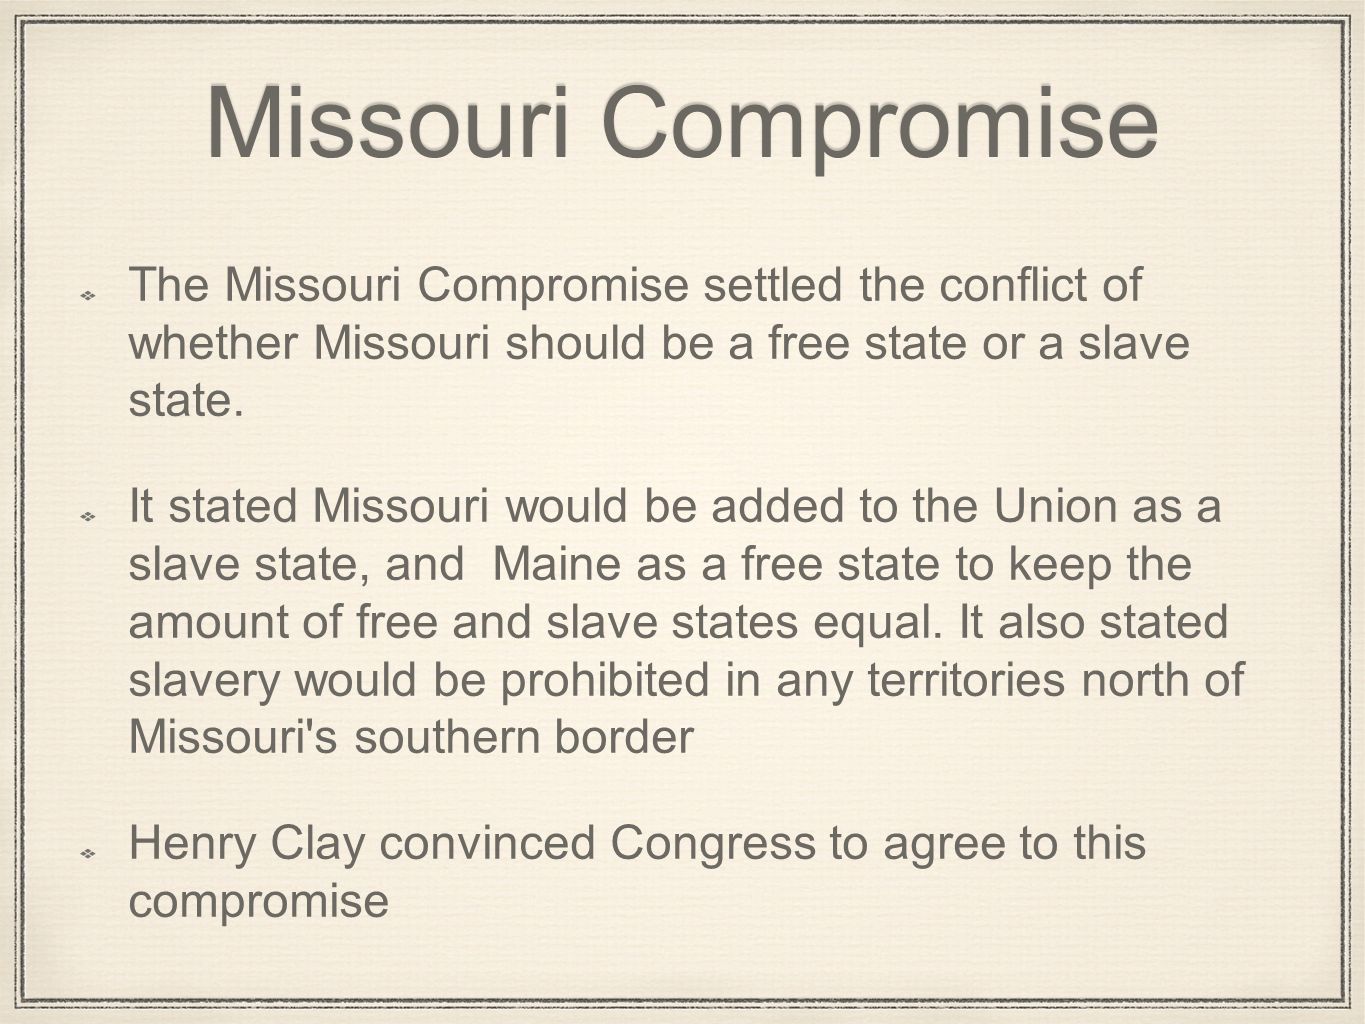 Missouri Compromise The Missouri Compromise settled the conflict of whether Missouri should be a free state or a slave state.